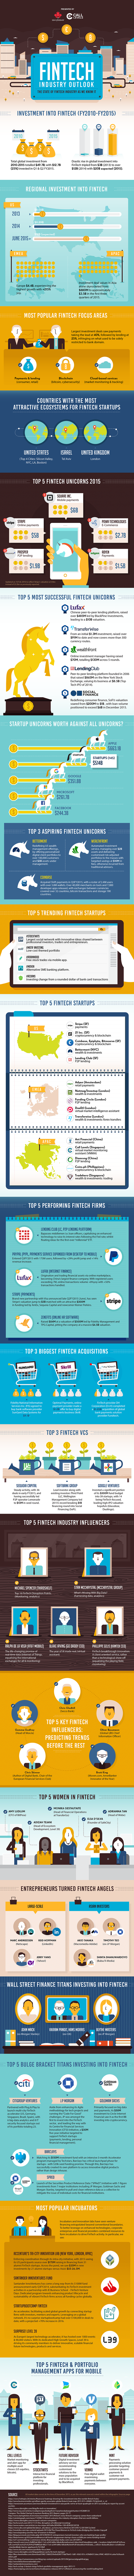 Infographic A Closer Look At The Fintech Industry